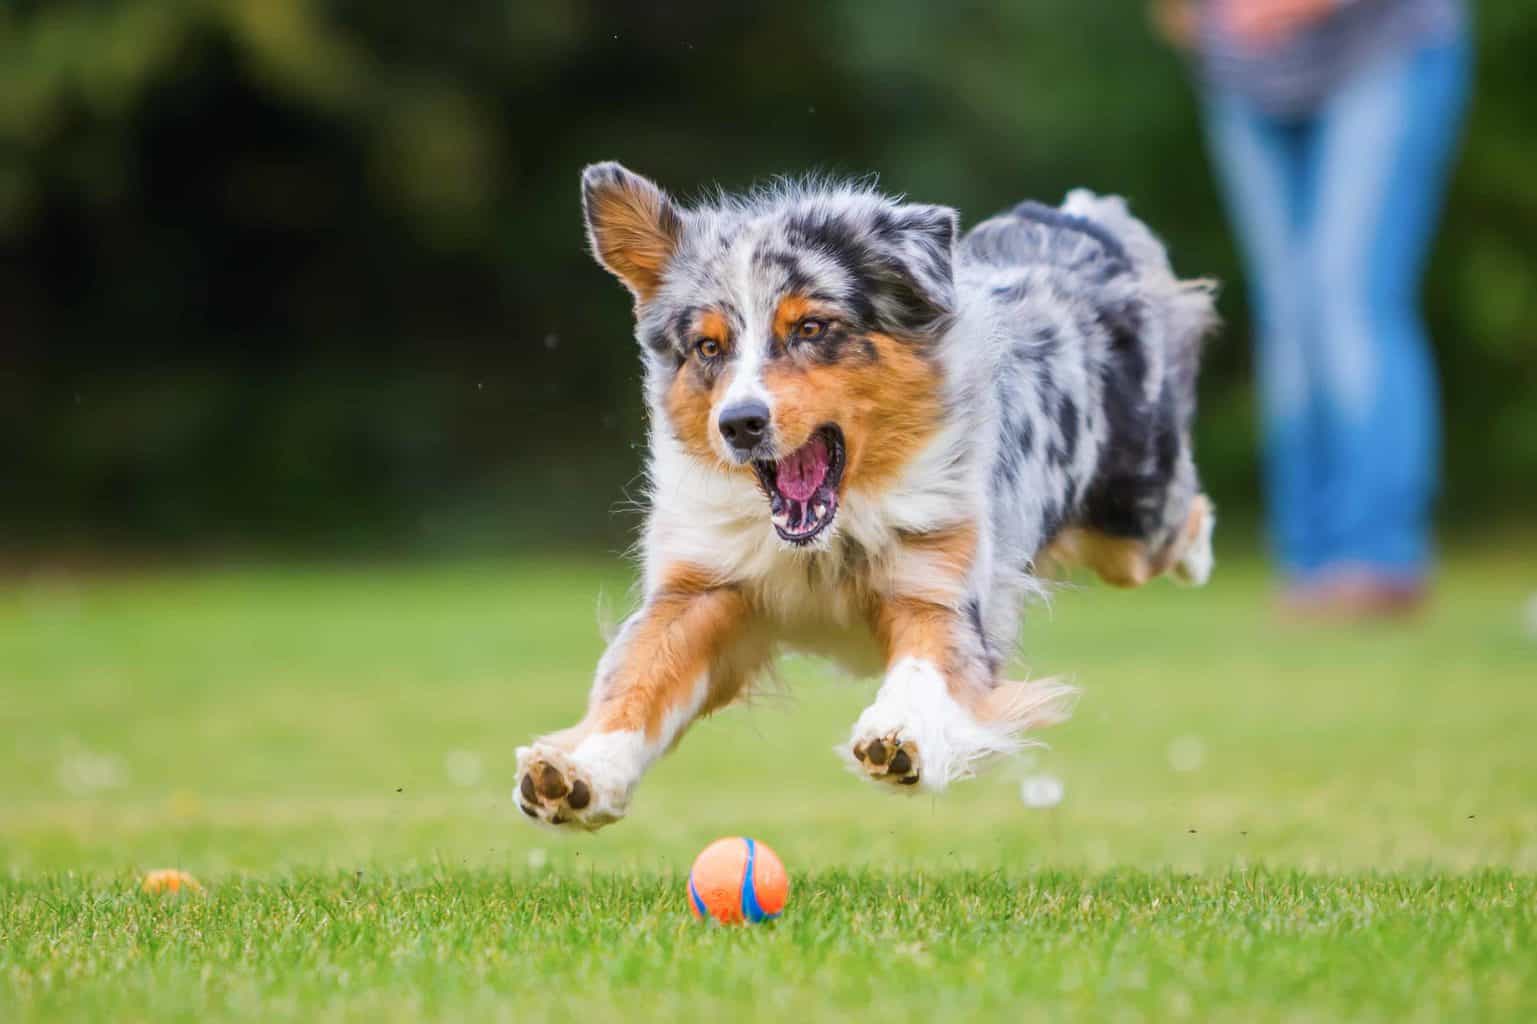 Australian Shepherd puppy plays fetch. Daily walks are an excellent start to help calm a high energy dog. Most dogs need at least a 30- to 60-minute daily walk.